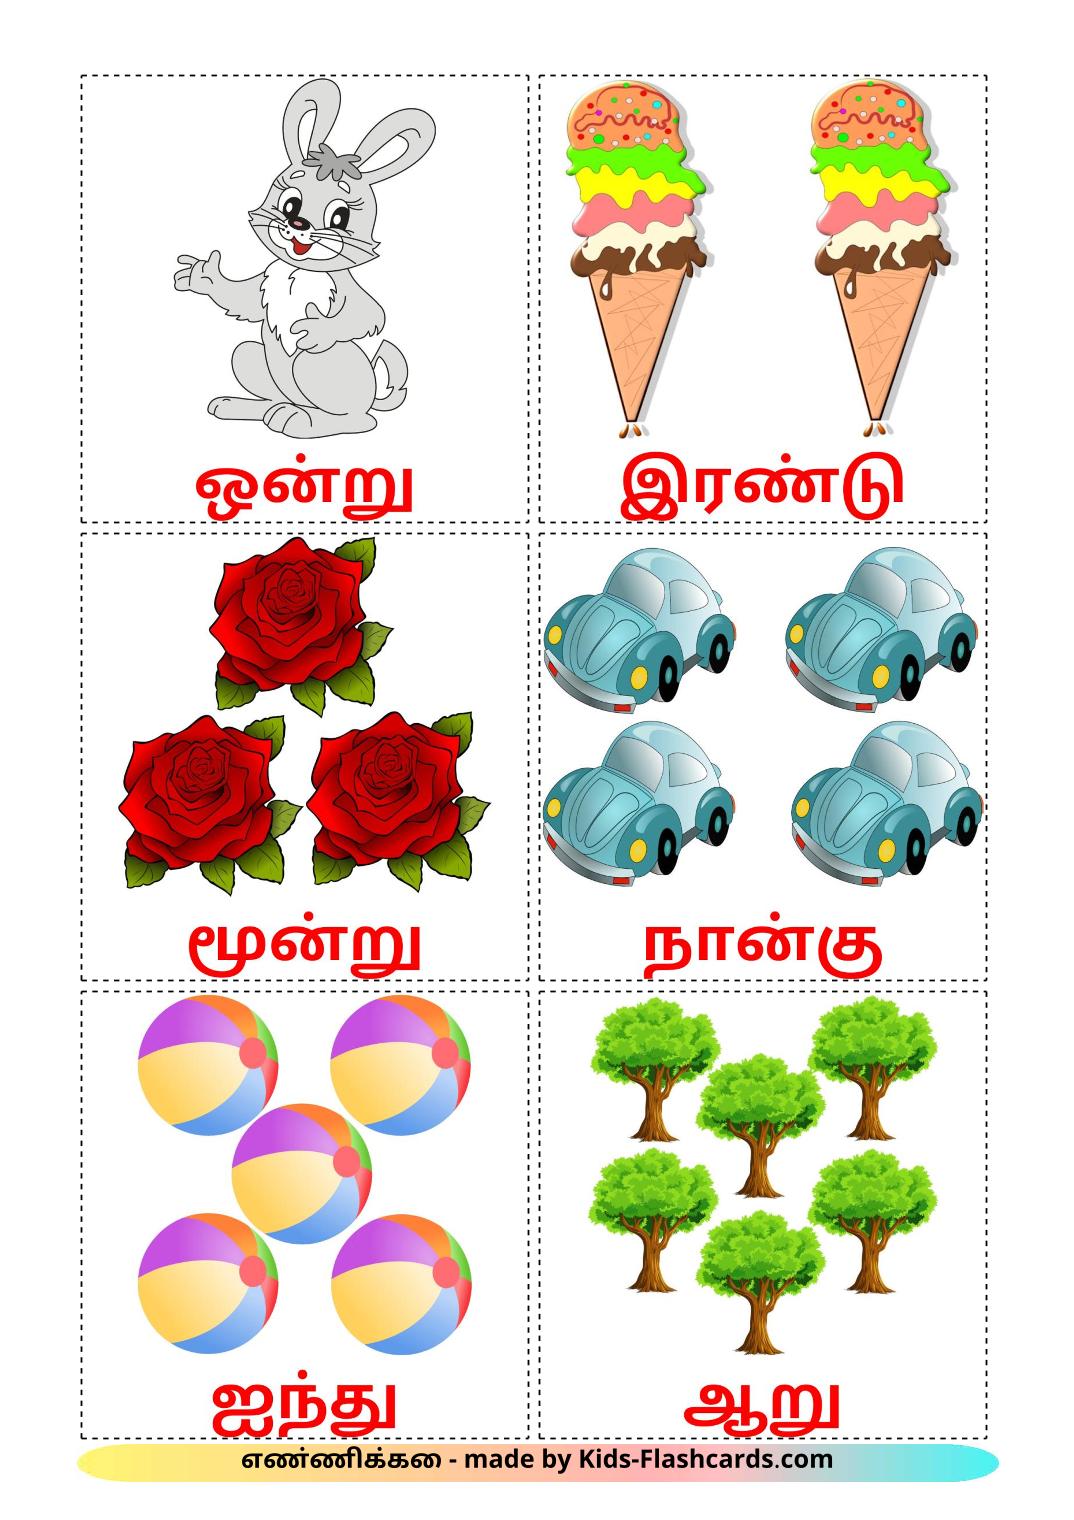 Counting - 10 Free Printable tamil Flashcards 